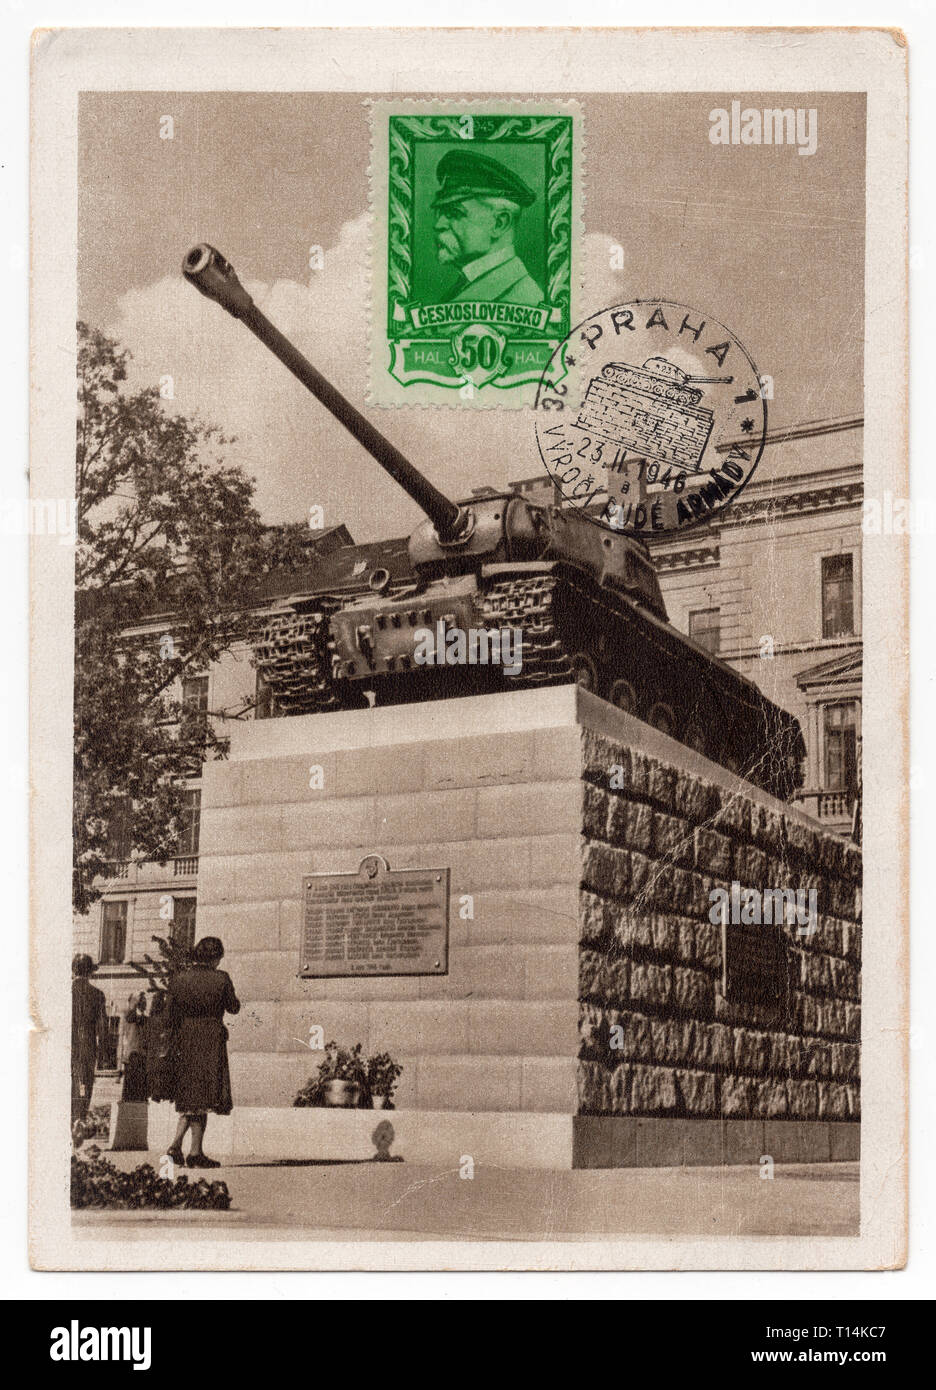 Monument to Soviet Tank Crews (Památník sovětských tankistů) in Prague, Czechoslovakia, depicted in the Czechoslovak vintage postcard issued before 1946. The monument was unveiled in July 1945 to commemorate the Soviet tank T-34 number 24 which entered into Prague as the first one at the morning on 9 May 1945. In fact a Soviet heavy tank IS-2 was installed on the pedestal and the number was wrongly changed to 23. The monument later known as the Pink Tank was removed in June 1991. Courtesy of the Azoor Postcard Collection. Stock Photo